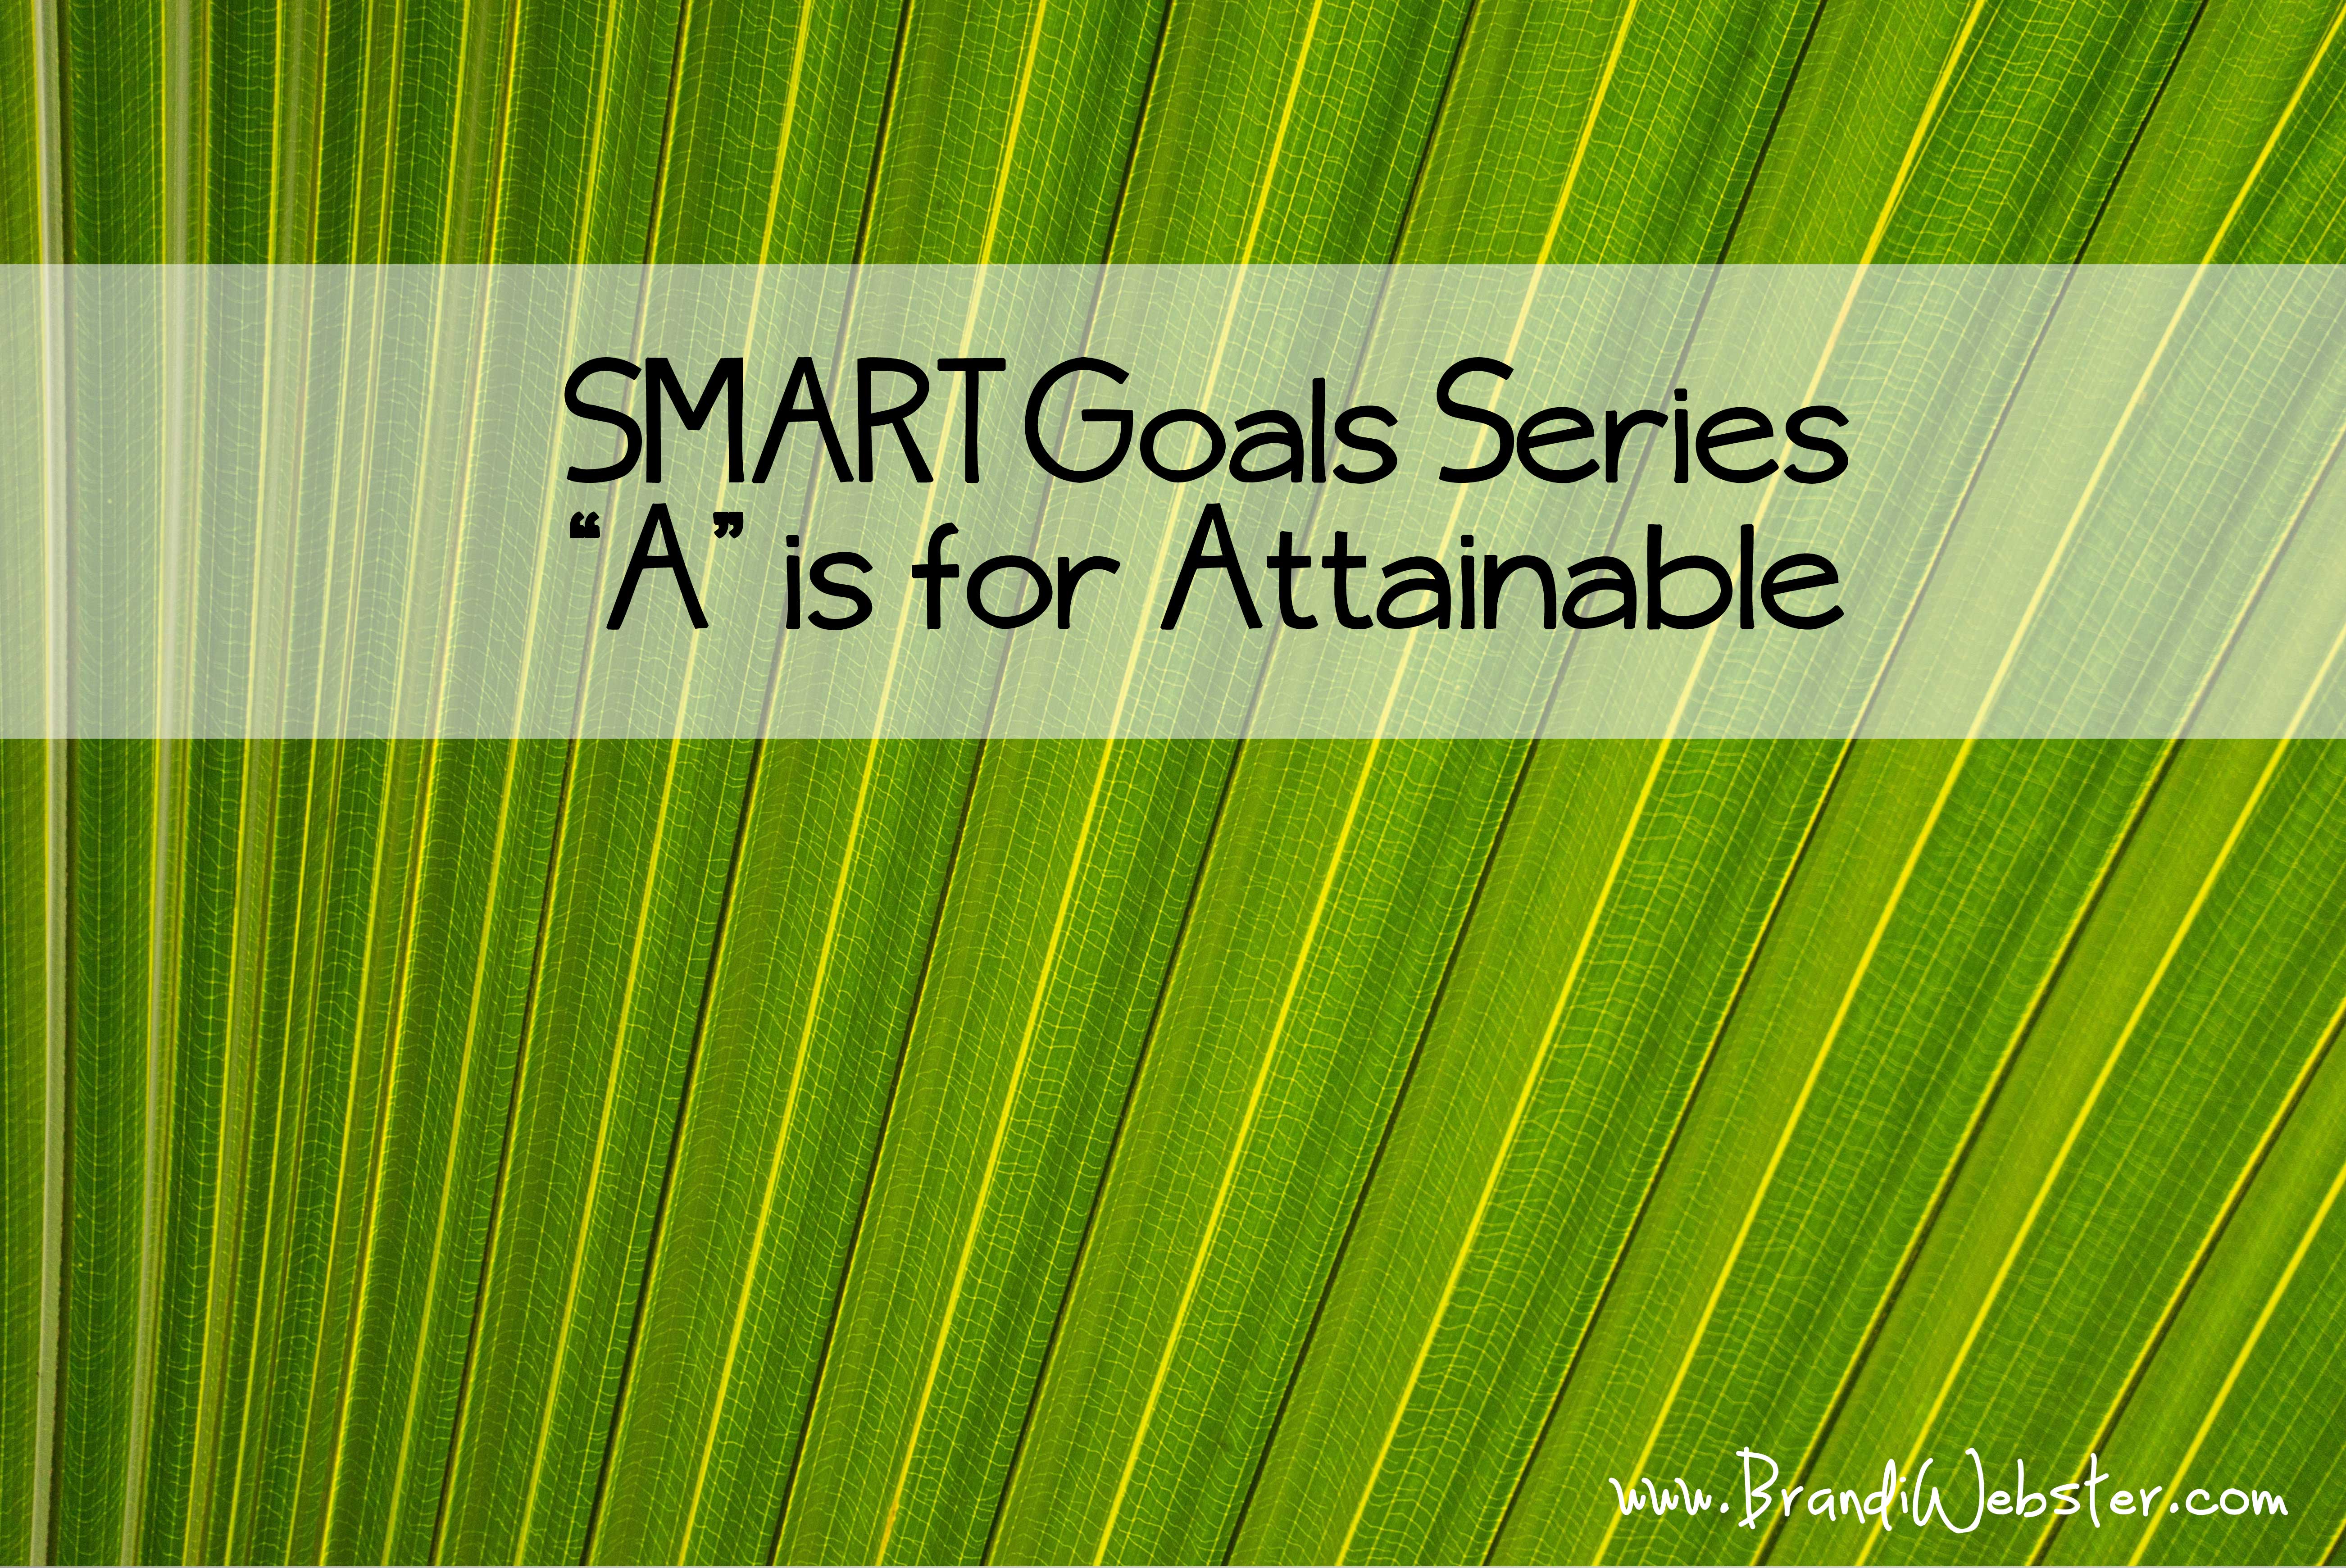 "A" is for Attainable in SMART Goals